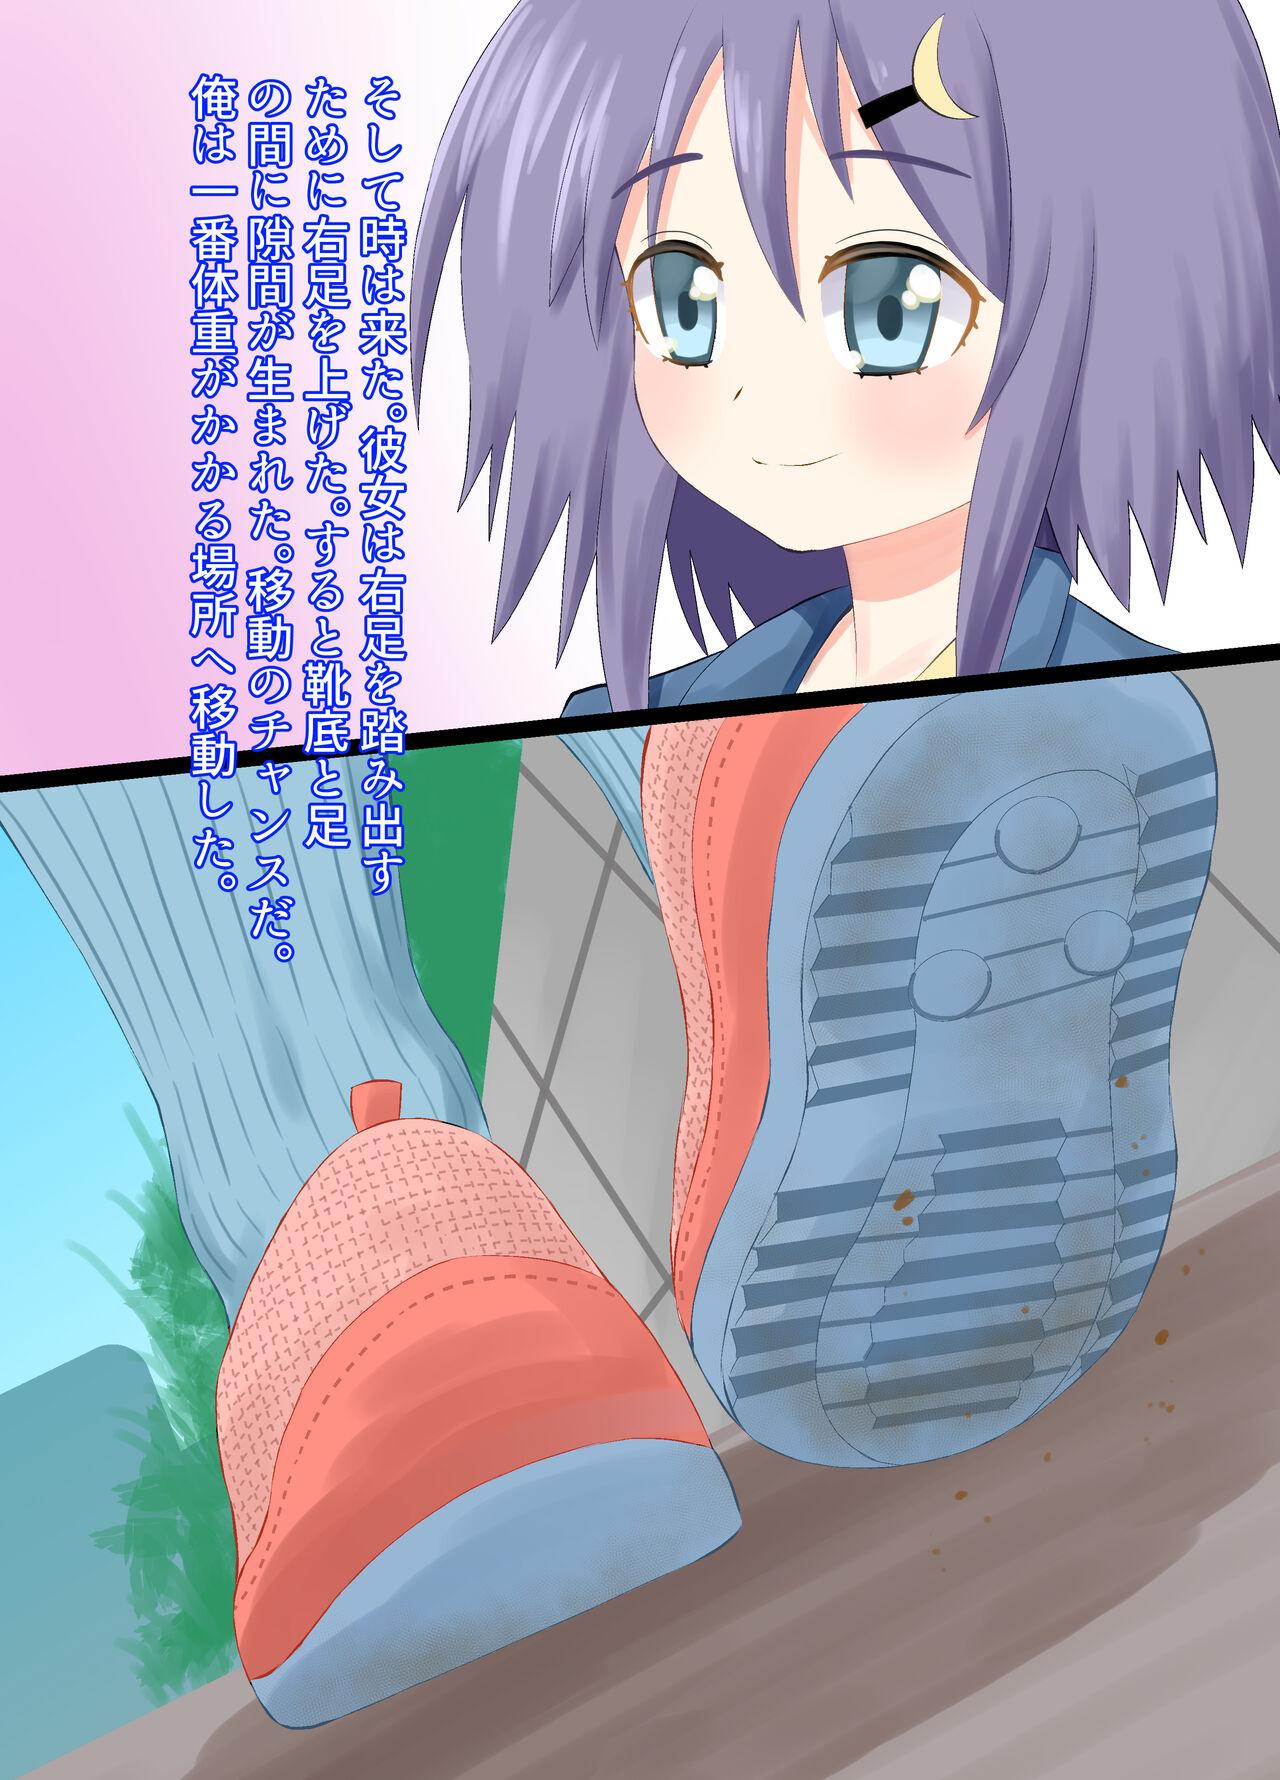 A CG collection of getting smaller and being stepped on by a girl 34